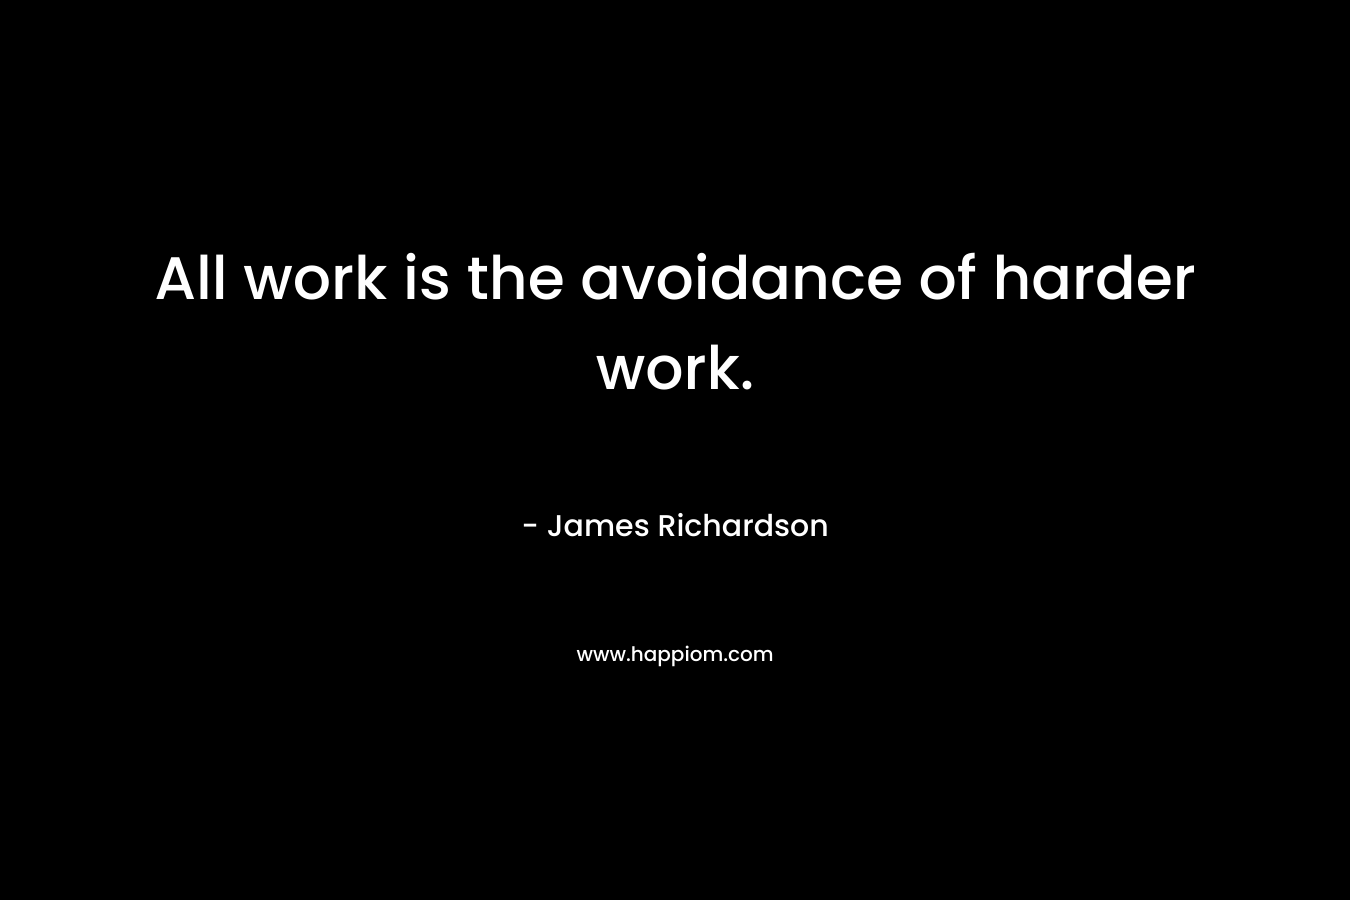 All work is the avoidance of harder work.